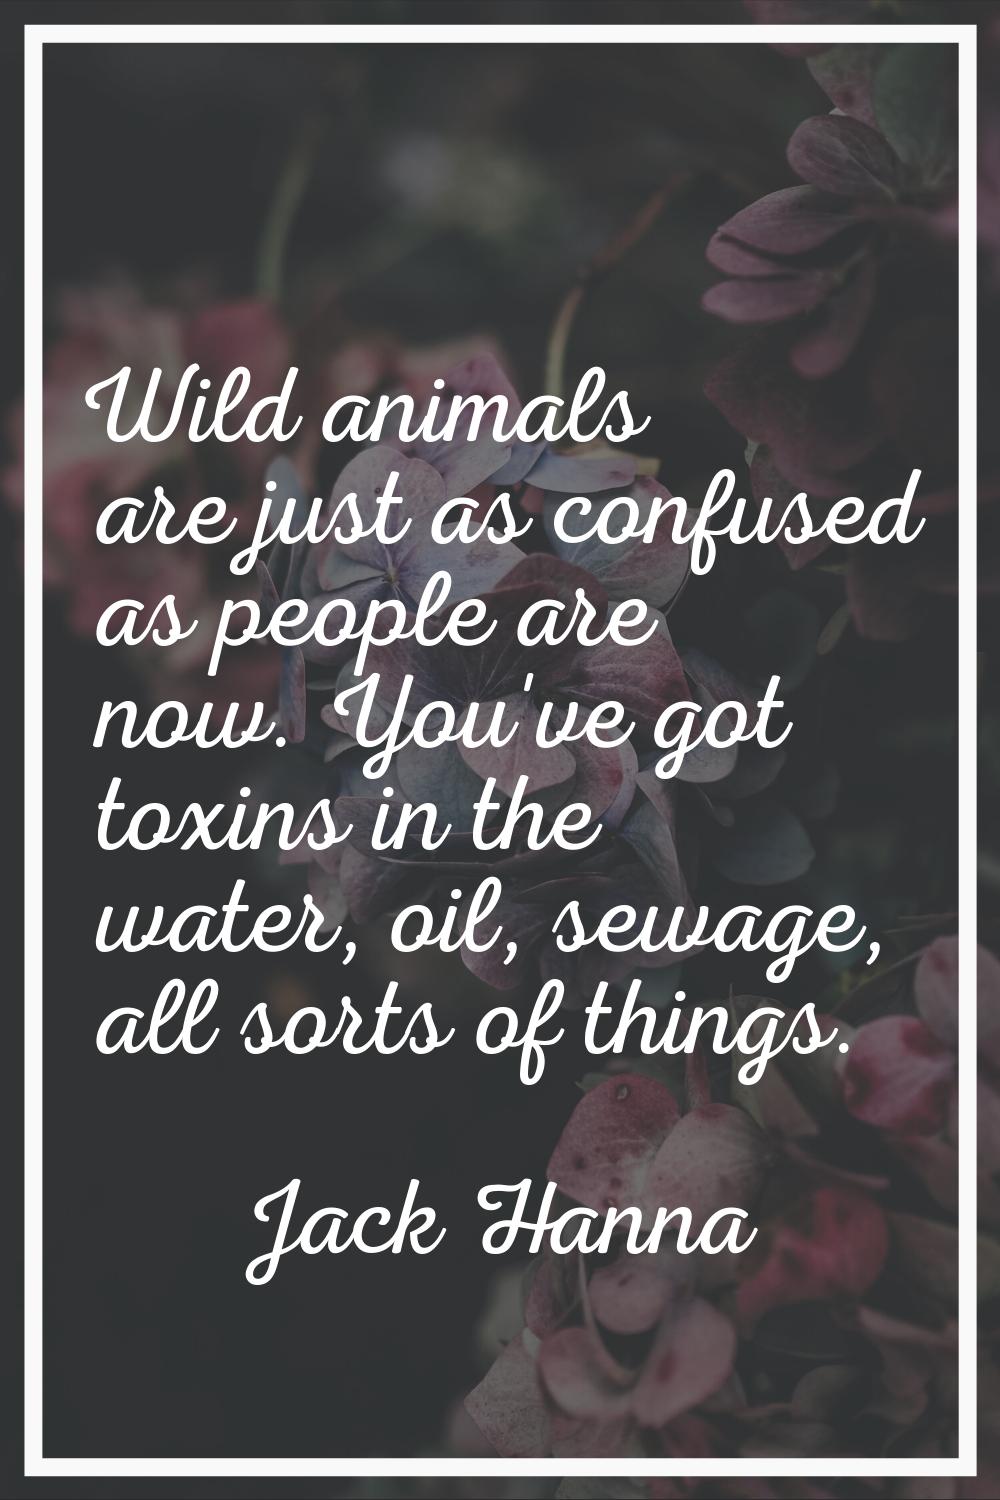 Wild animals are just as confused as people are now. You've got toxins in the water, oil, sewage, a